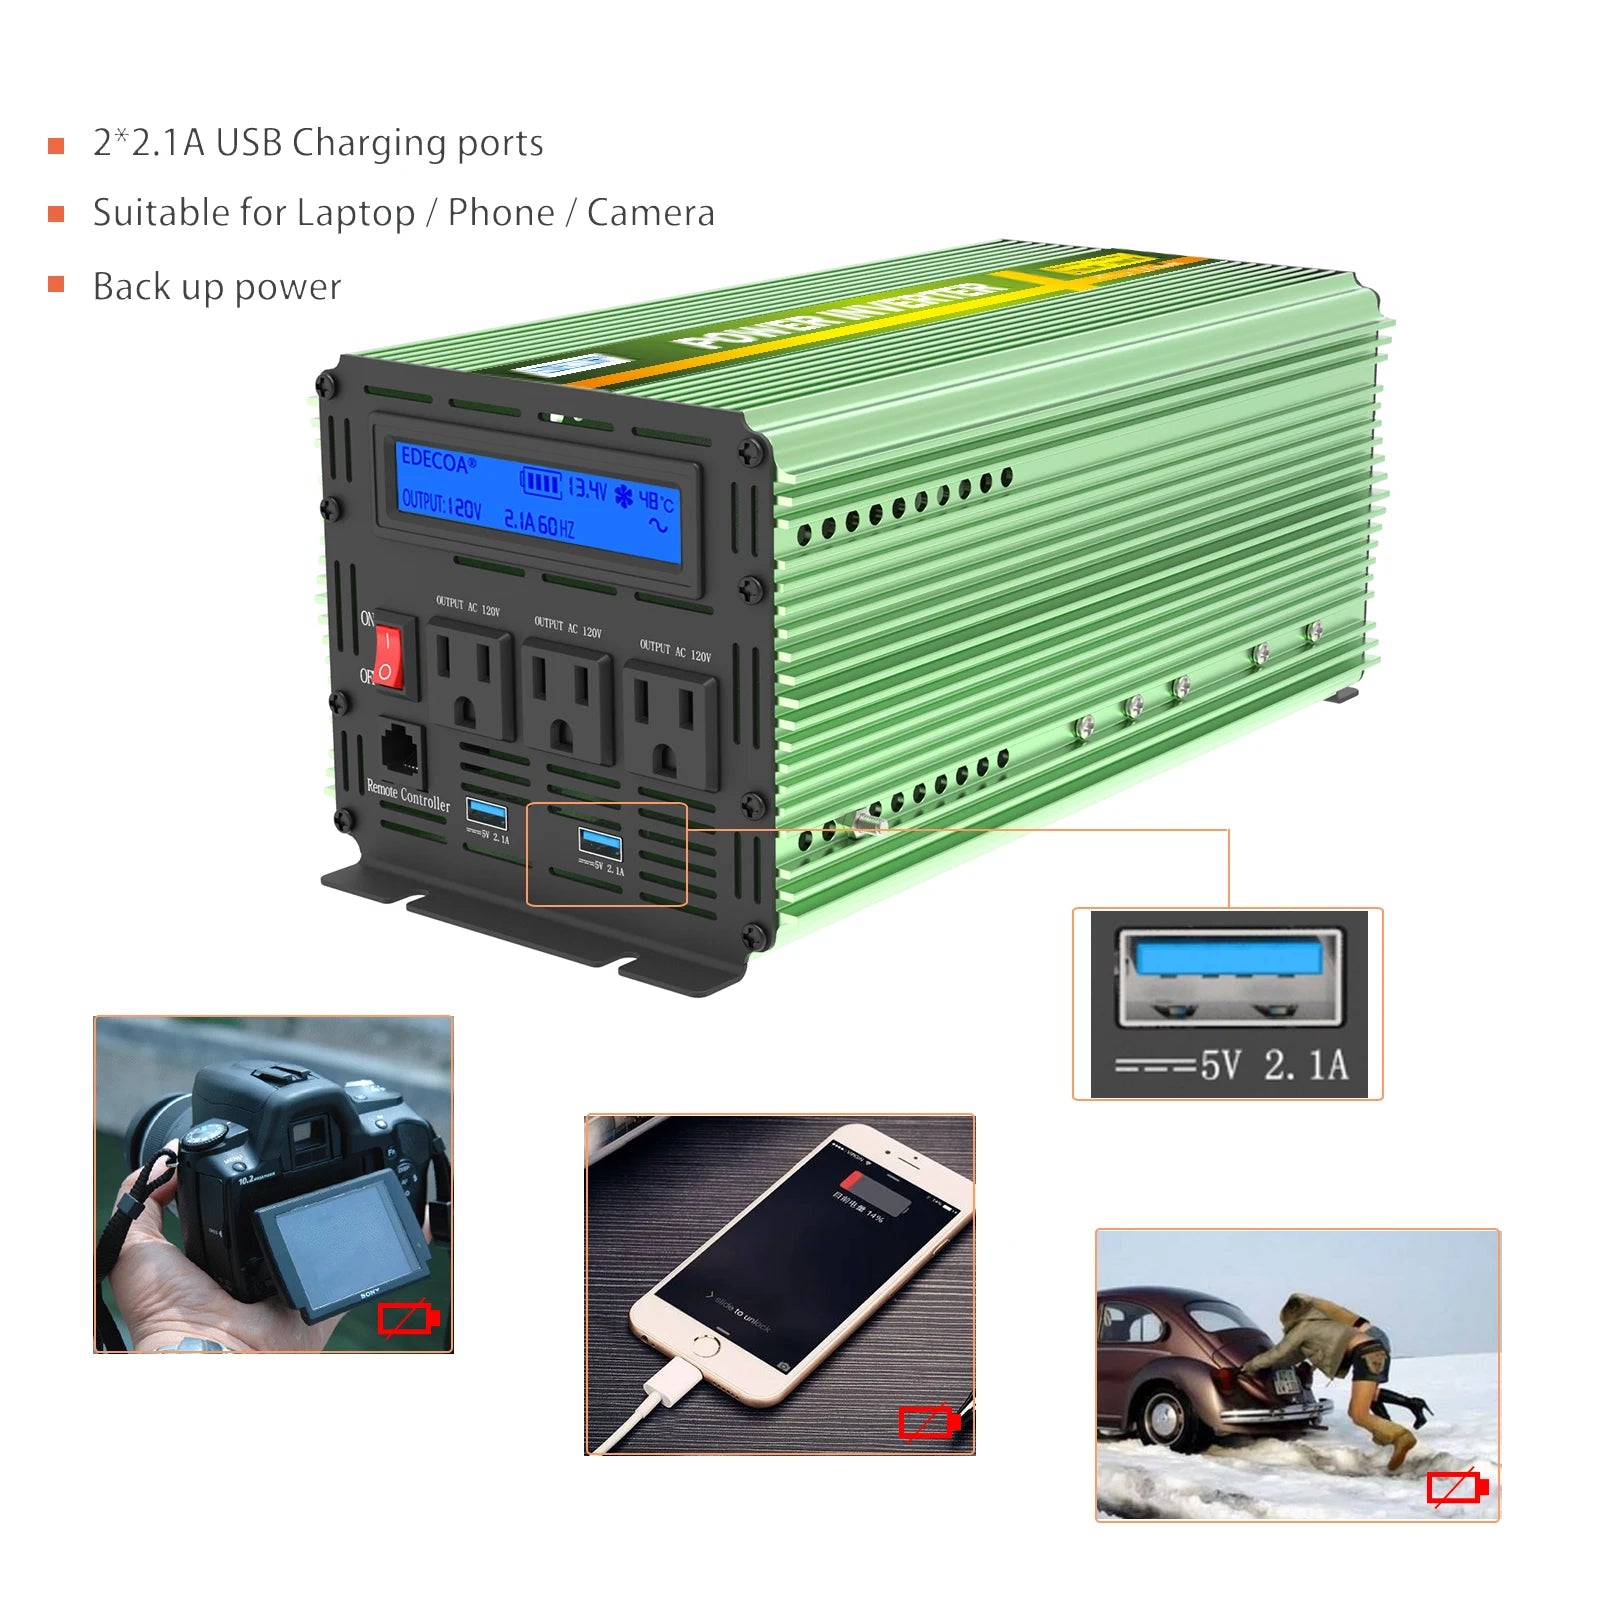 Pure sine wave inverter converts DC to AC power, ideal for backup power applications.